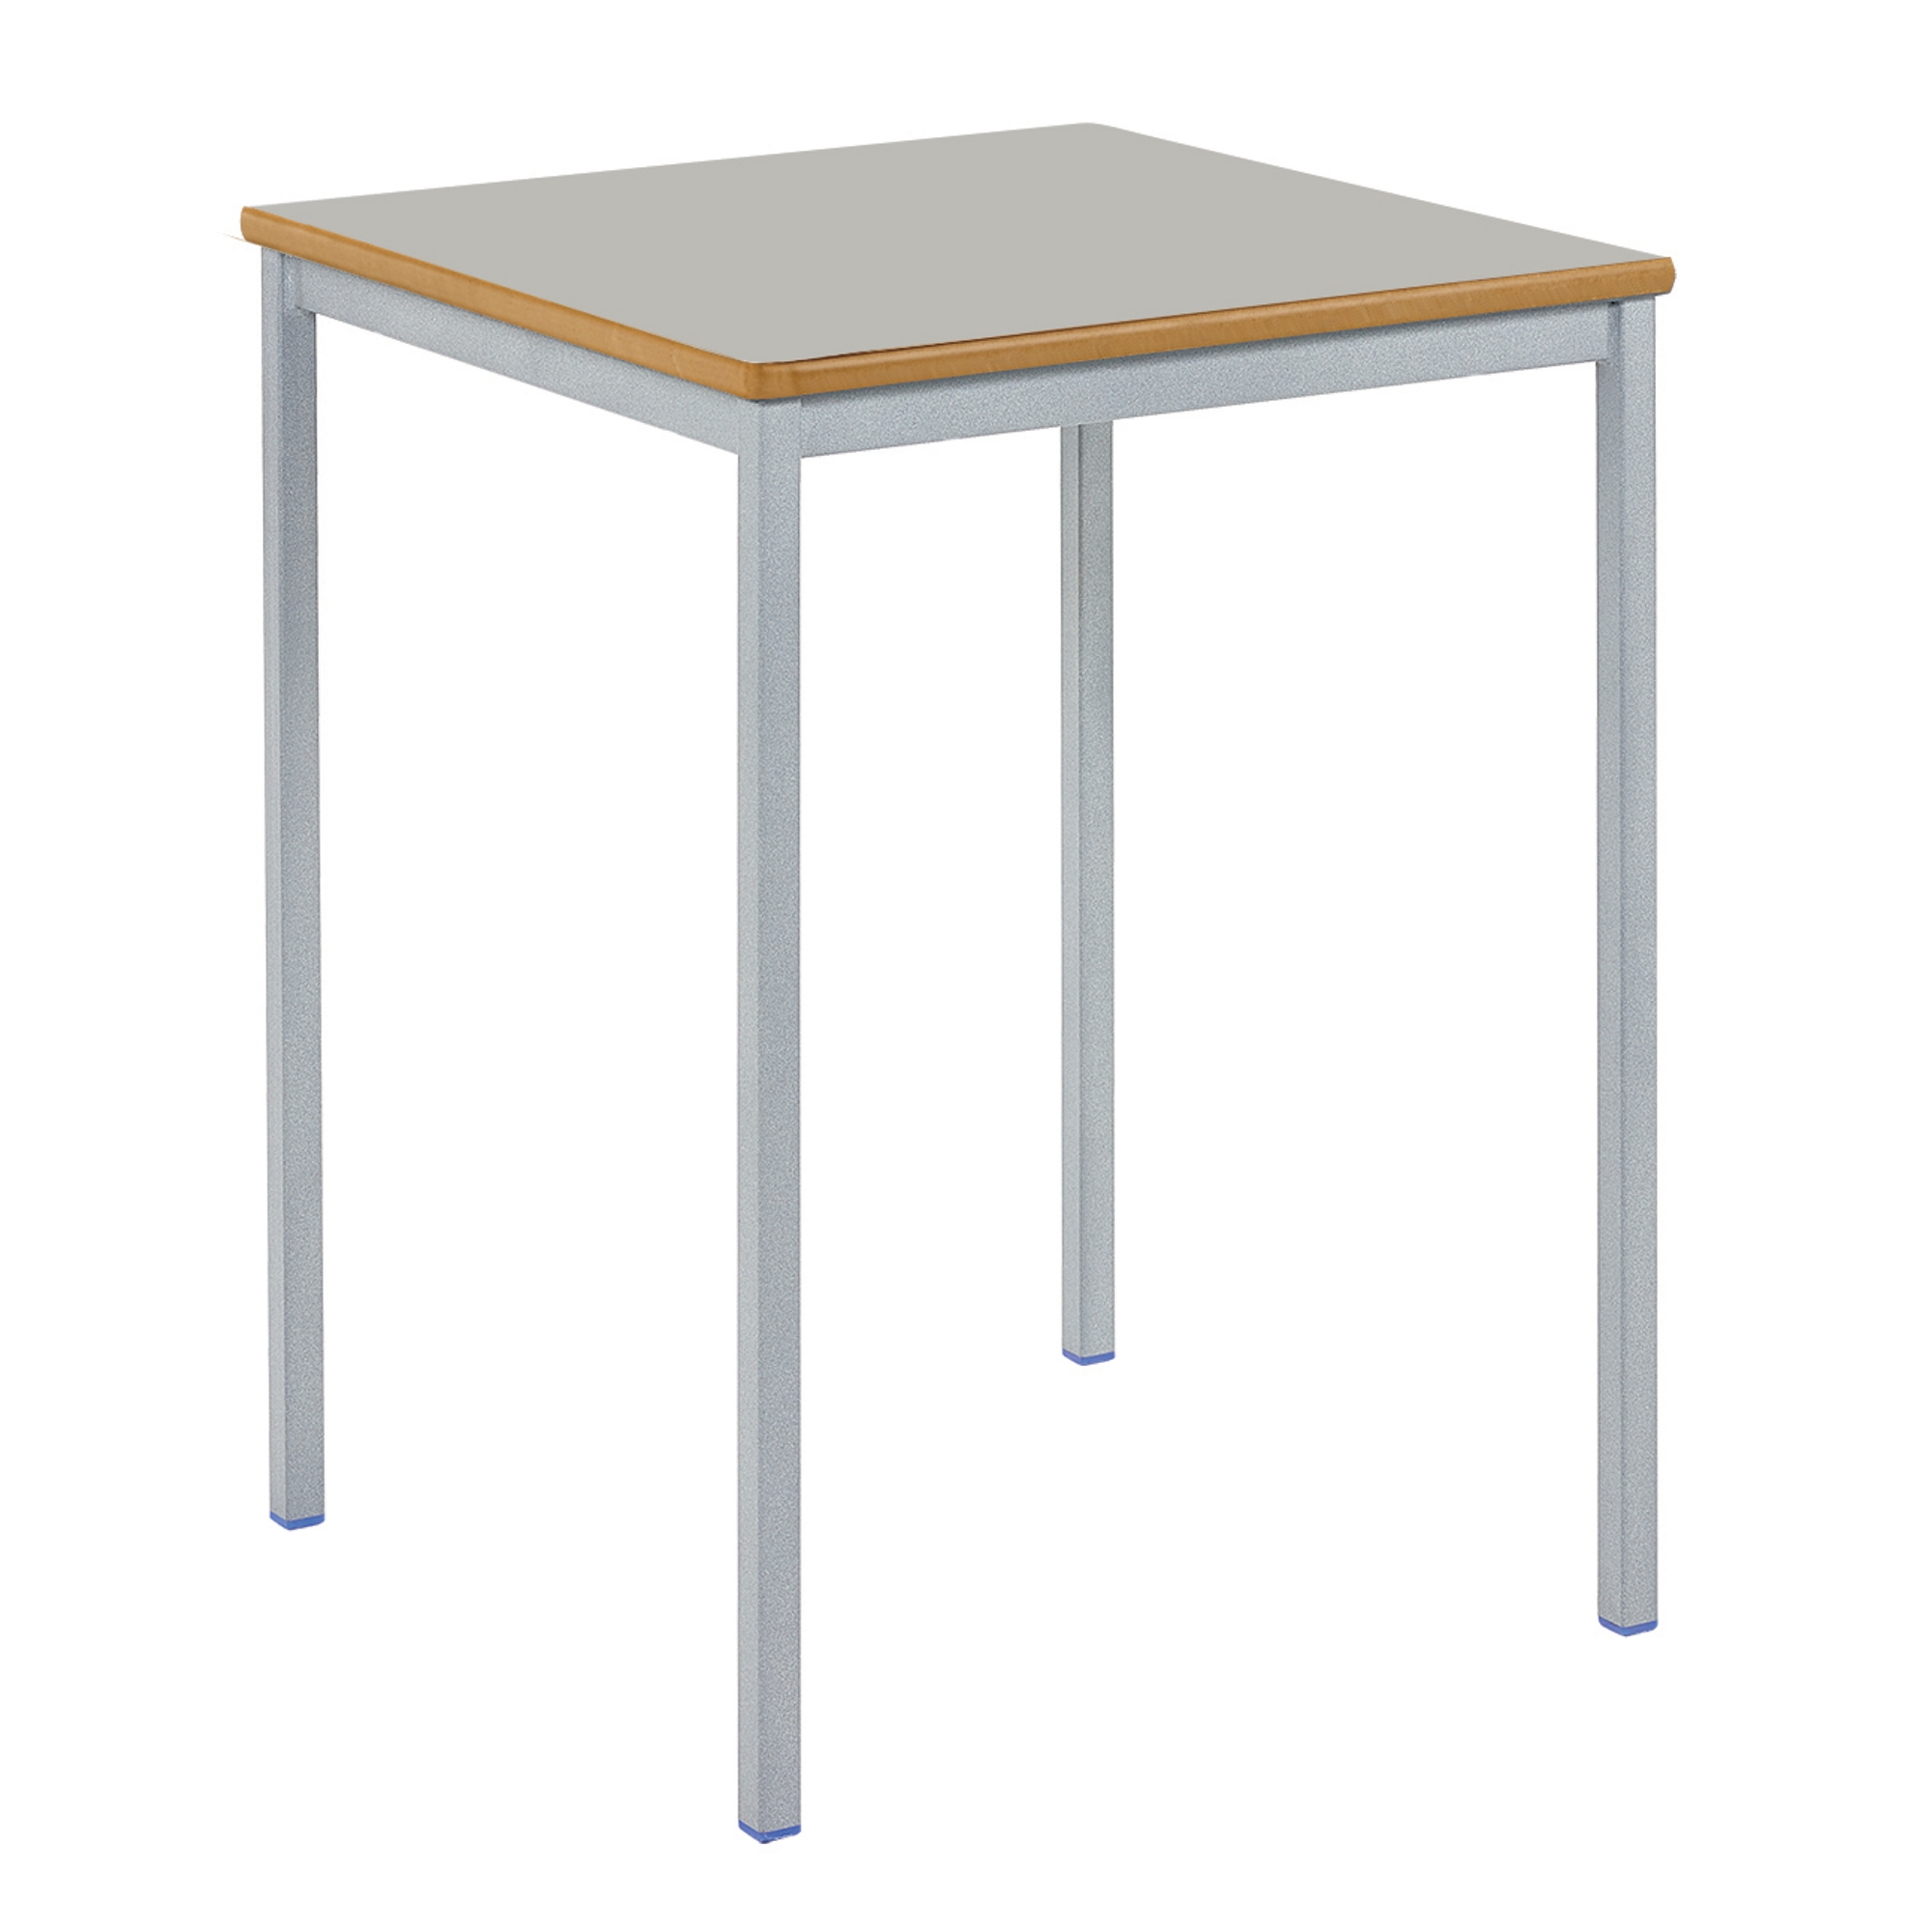 Classmates Square Fully Welded Classroom Table - 600 x 600 x 760mm - Grey